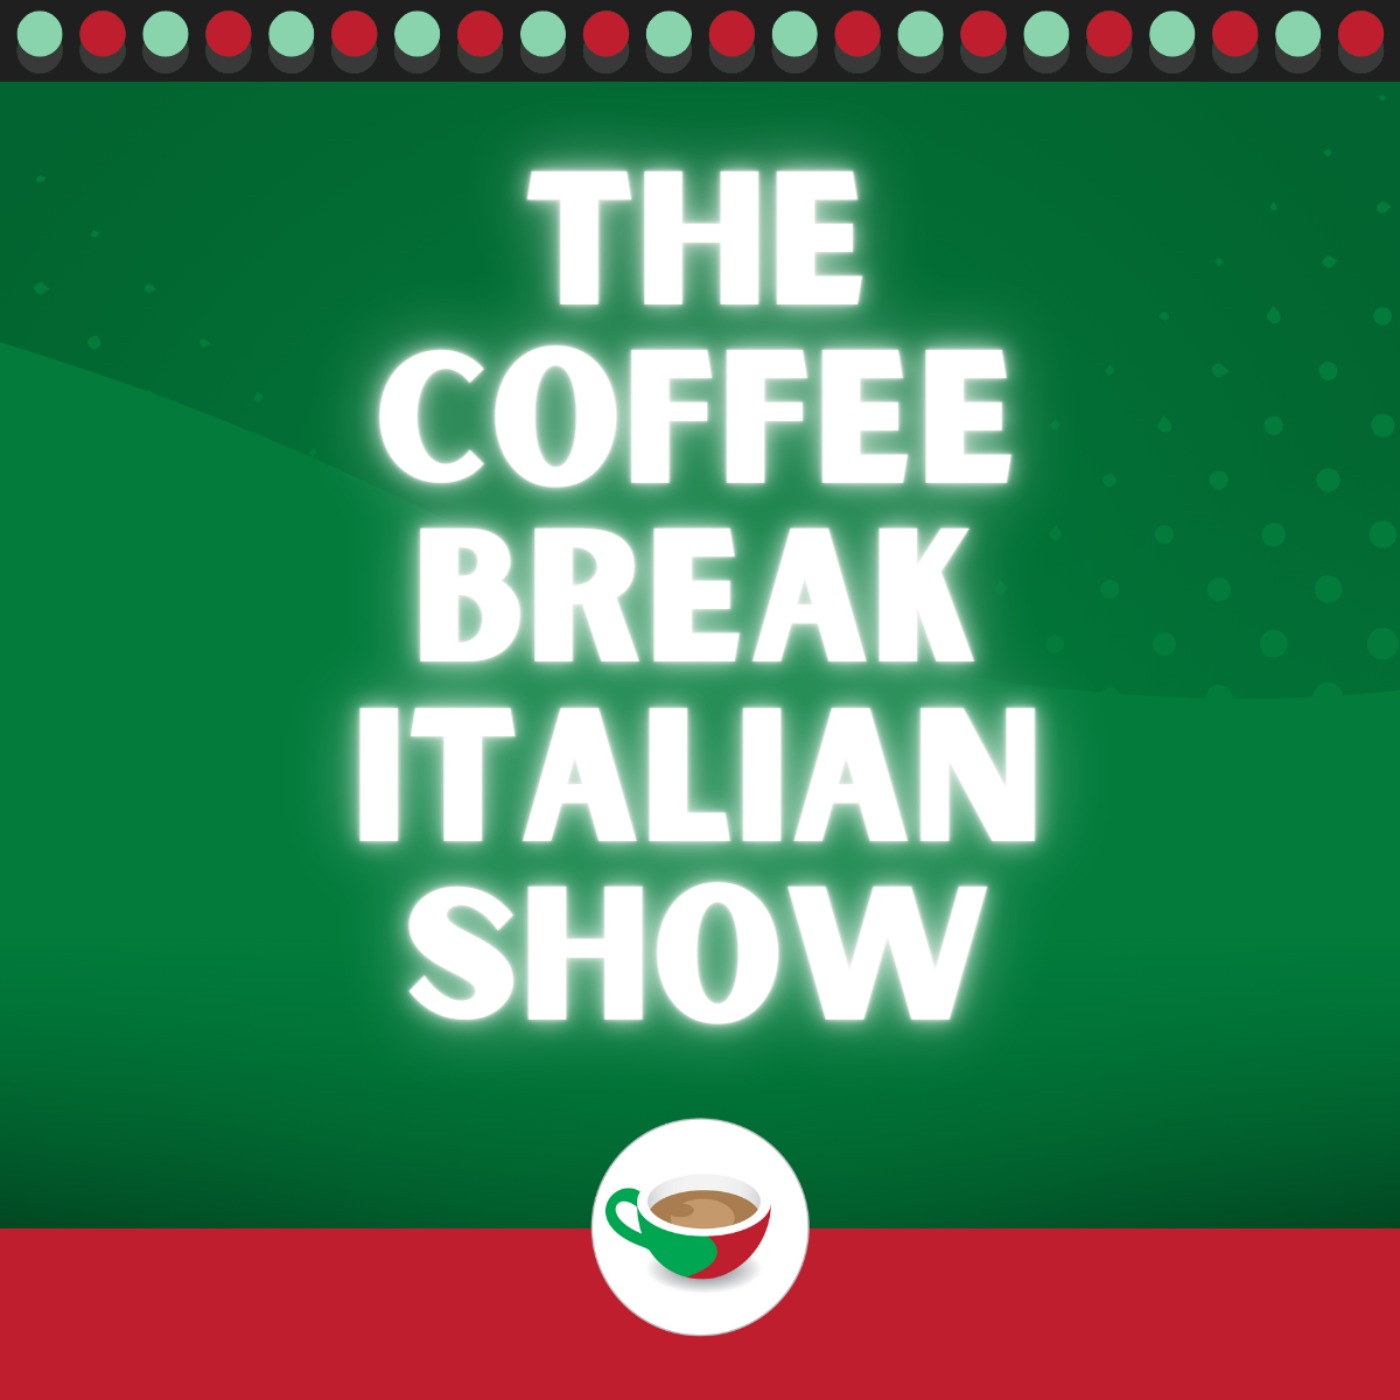 Practising 'avere' expressions - Part 2 | The Coffee Break Italian Show 1.06